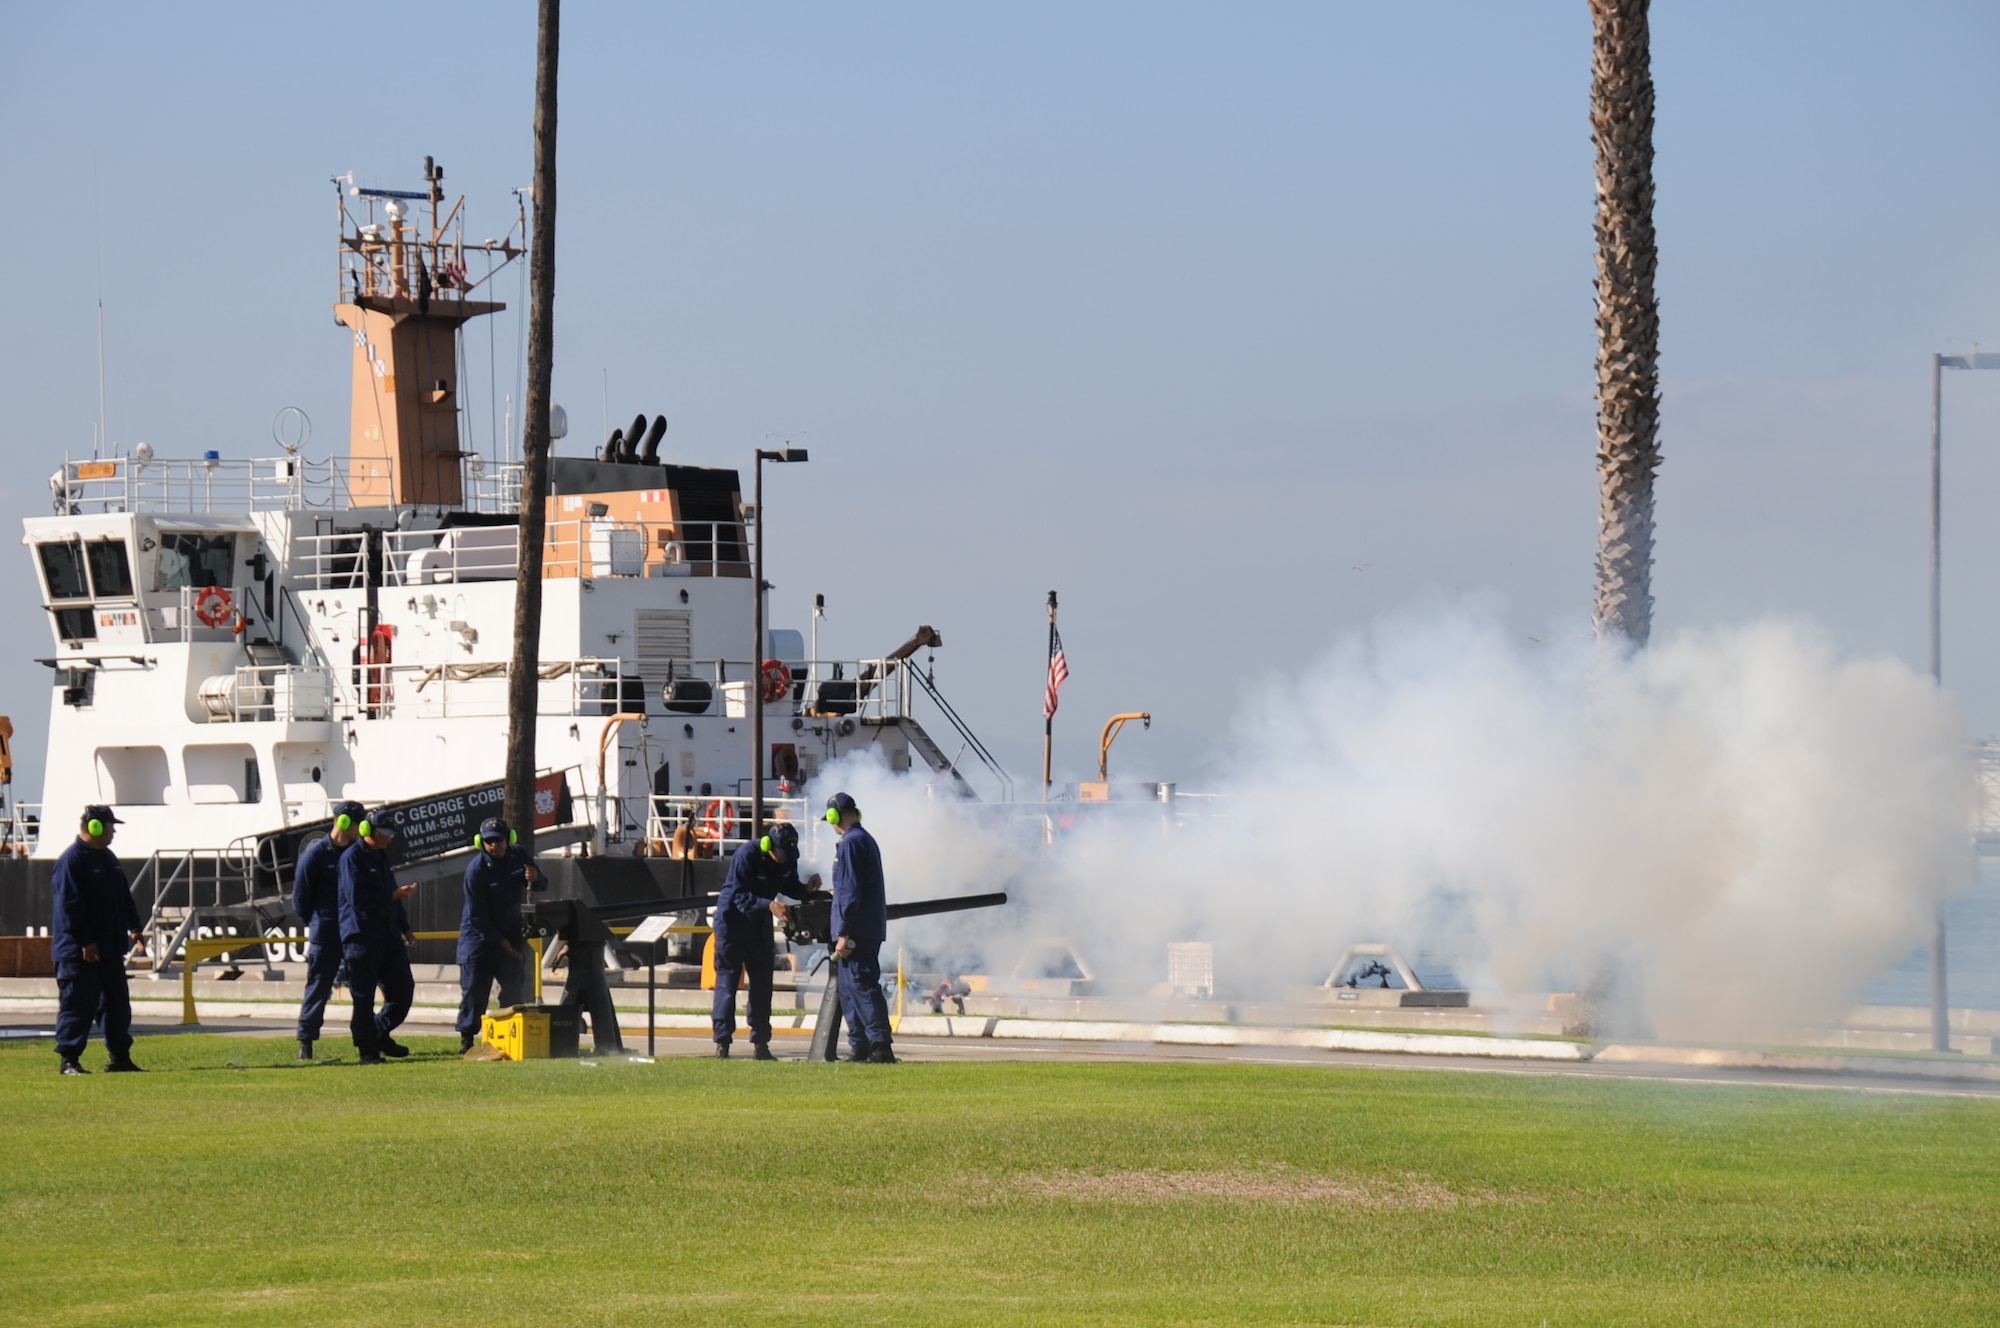 Coast Guardsmen fire off a cannon round near the U.S. Coast Guard Cutter George Cobb (WLM-564) Sept. 17 at the start of the POW/MIA torch relay run. Runners started a 24-hour, 154 mile long route from U.S. Coast Guard Base Los Angeles-Long Beach on Terminal Island in the Port of San Pedro to the Space and Missile Systems Center's Schriever Space Complex at Los Angeles Air Force Base in El Segundo, Calif. (U.S. Air Force photo/Van Ha)